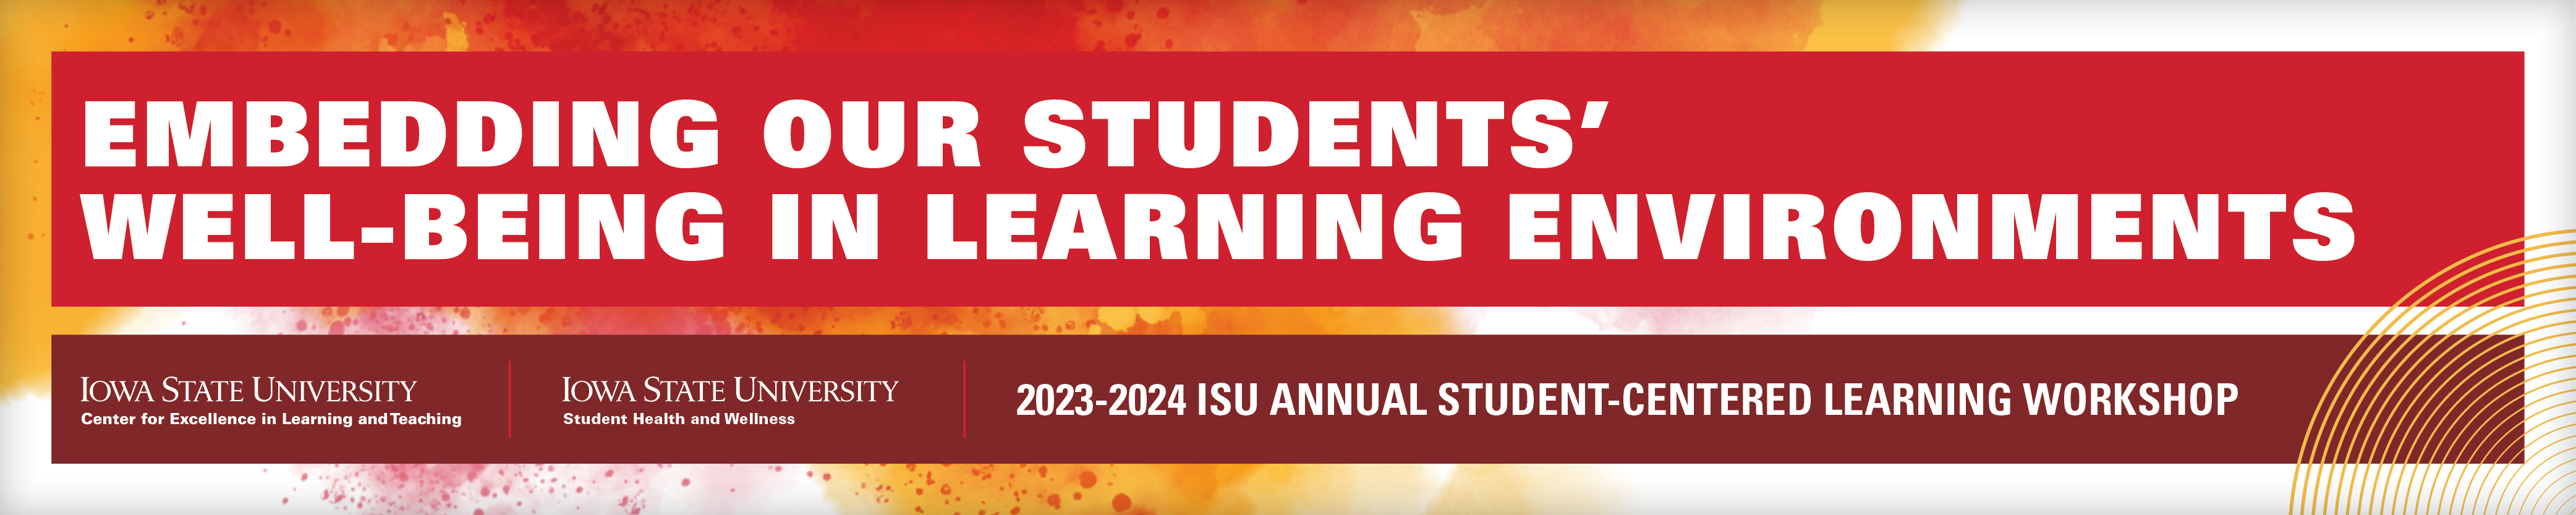 Embedding Our Students' Well-Being in Learning Environments in white letters on a cardinal red banner with ISU Annual Student-Centered Workshop beneath it.